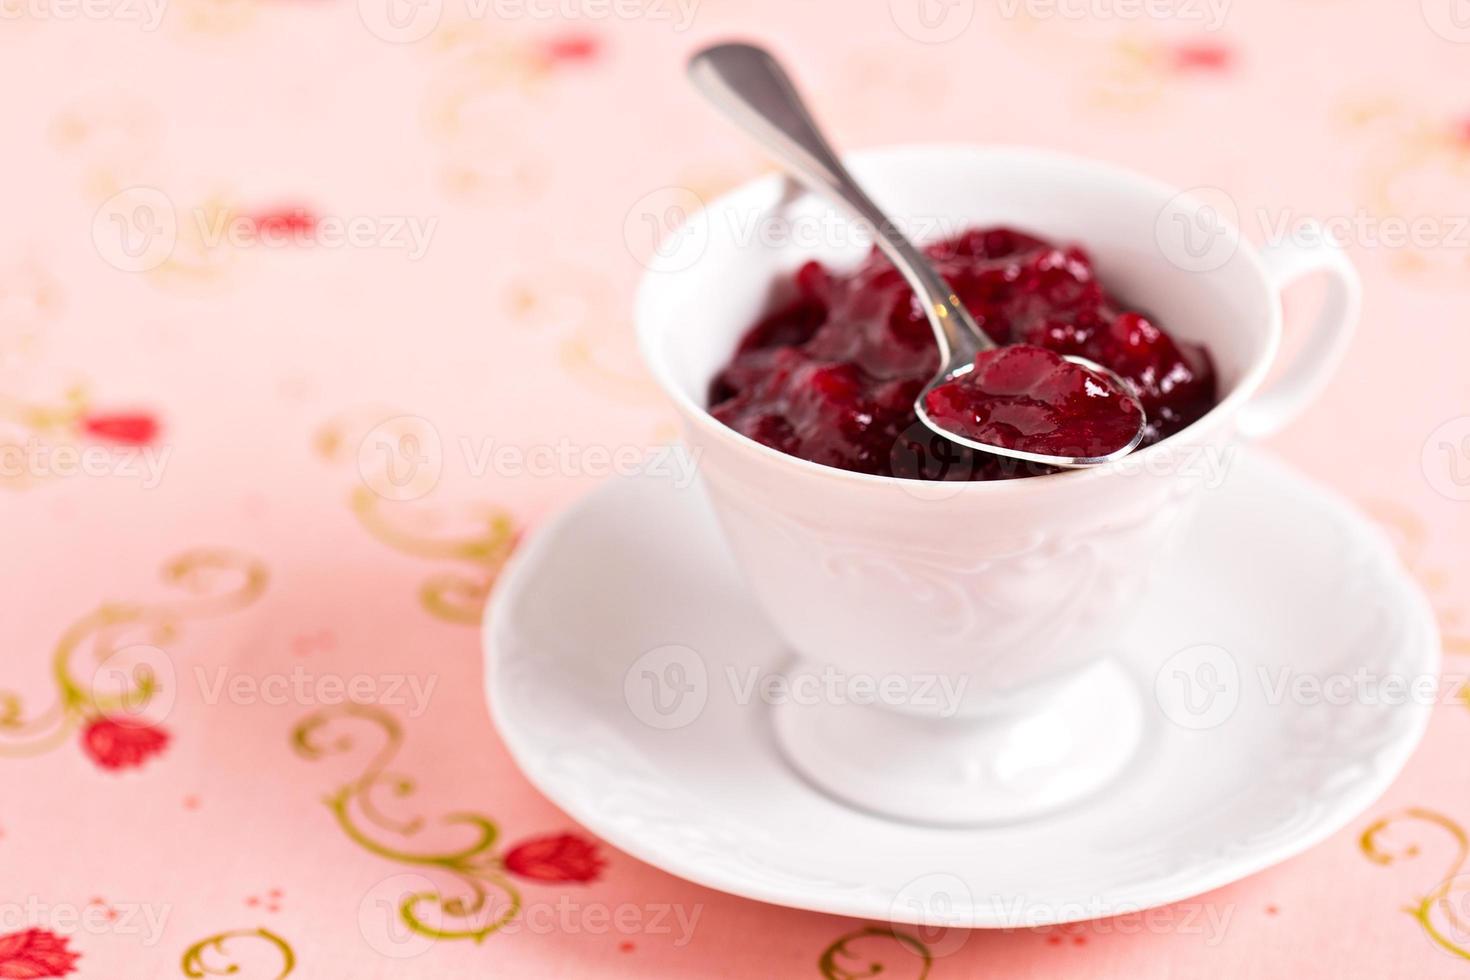 Homemade cranberry sauce in a cup, holiday recipe photo